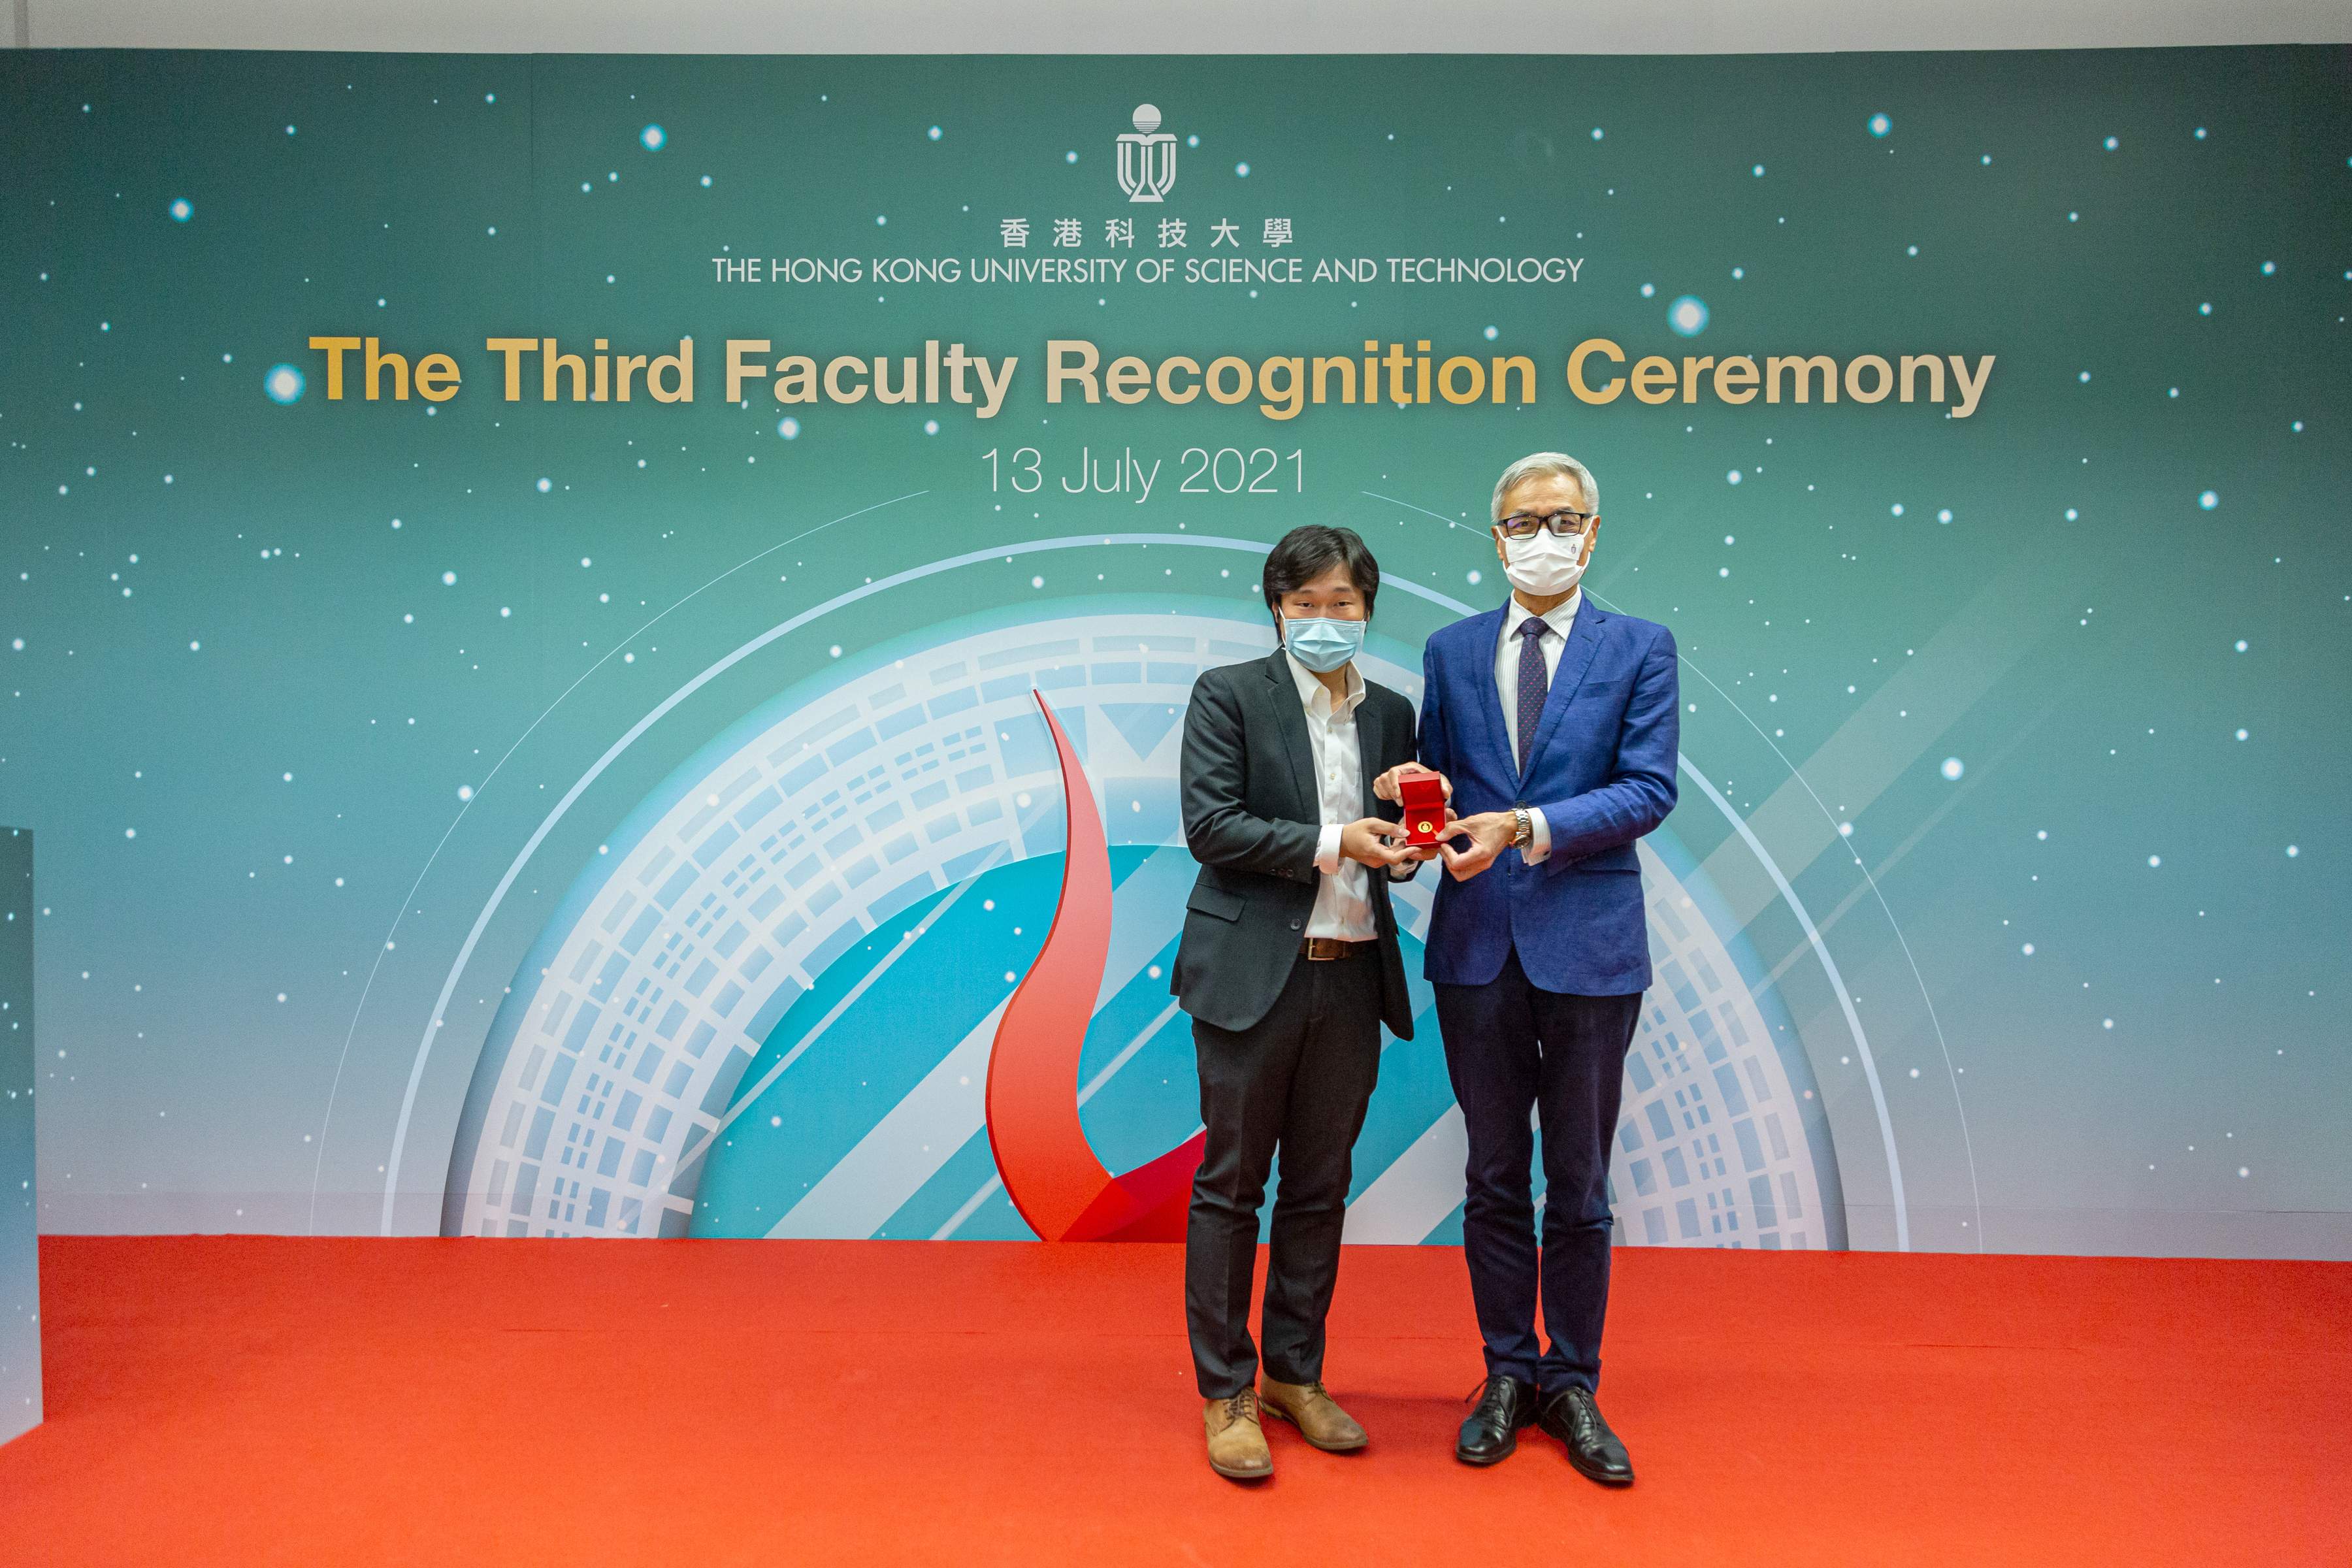 Faculty Recognition Ceremony 2021